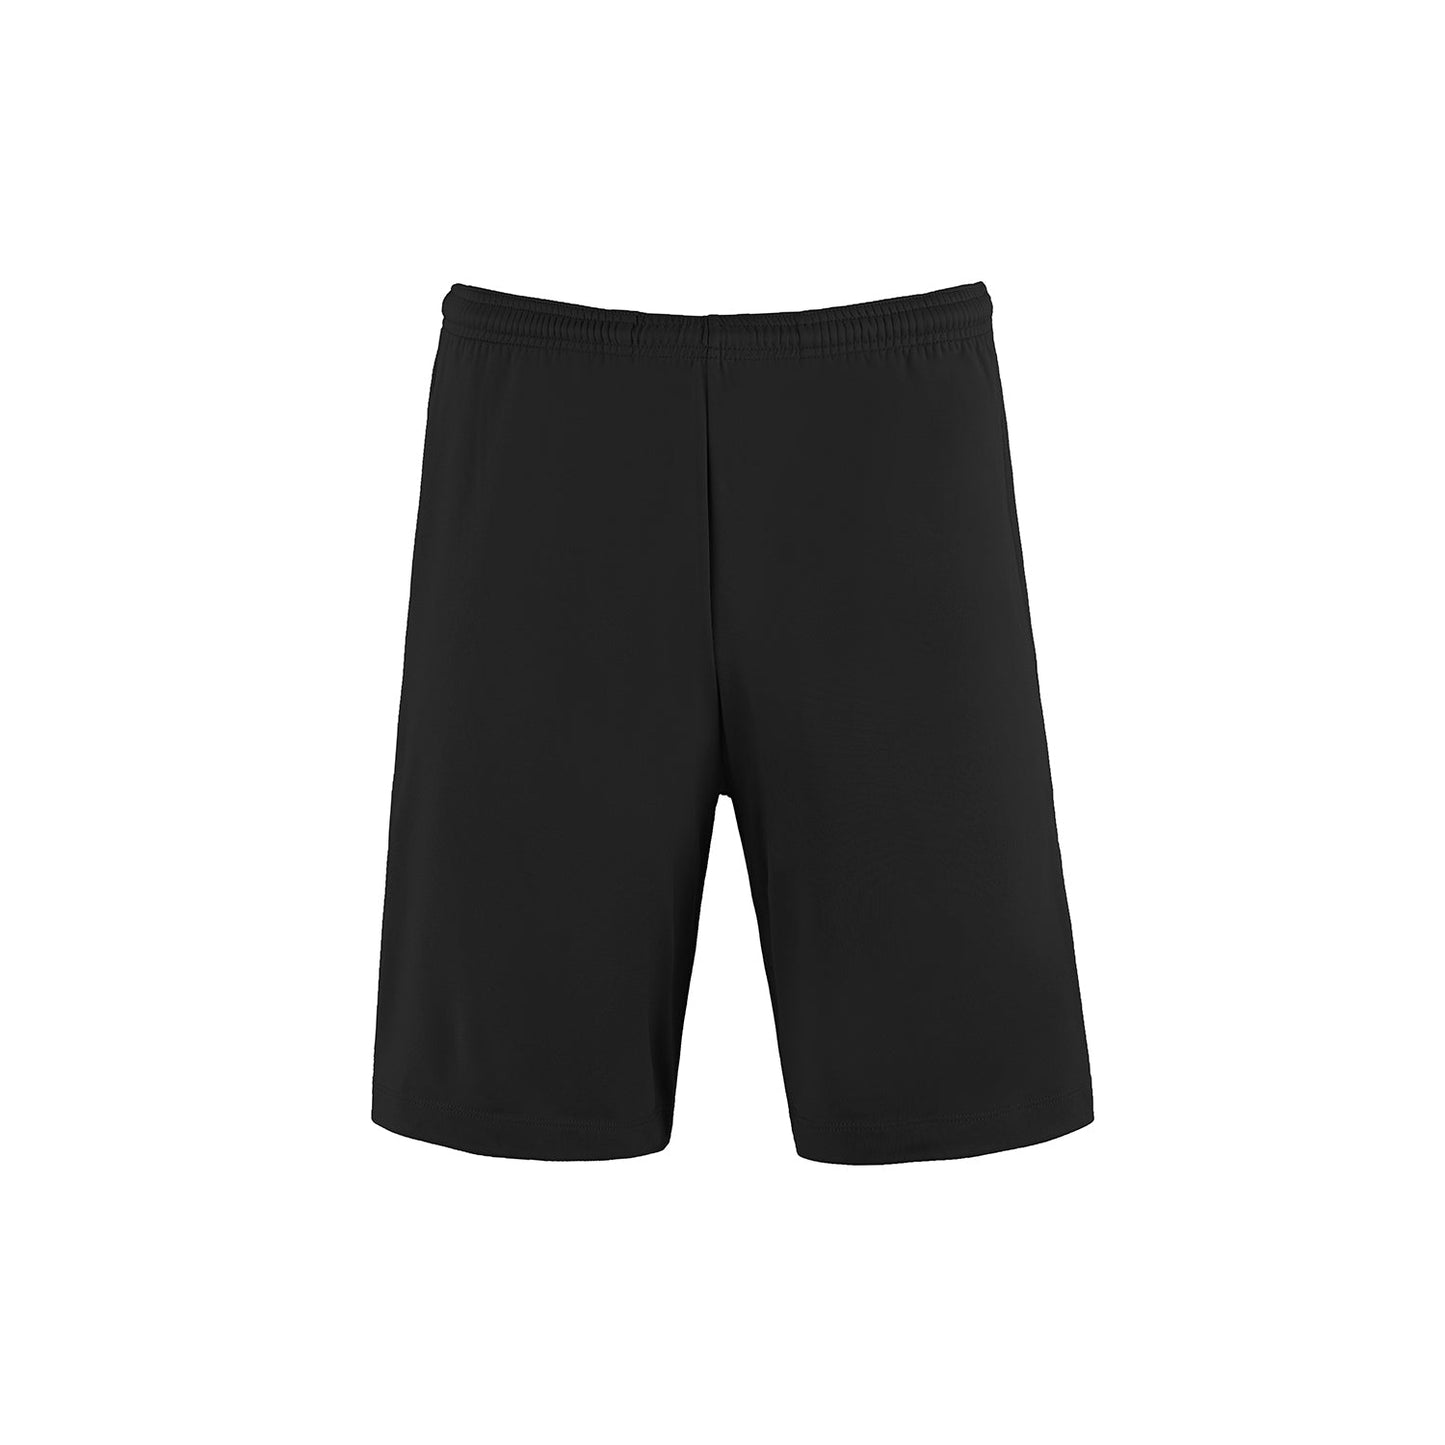 P04475 - Wave Athletic Short with Pockets Black / XS